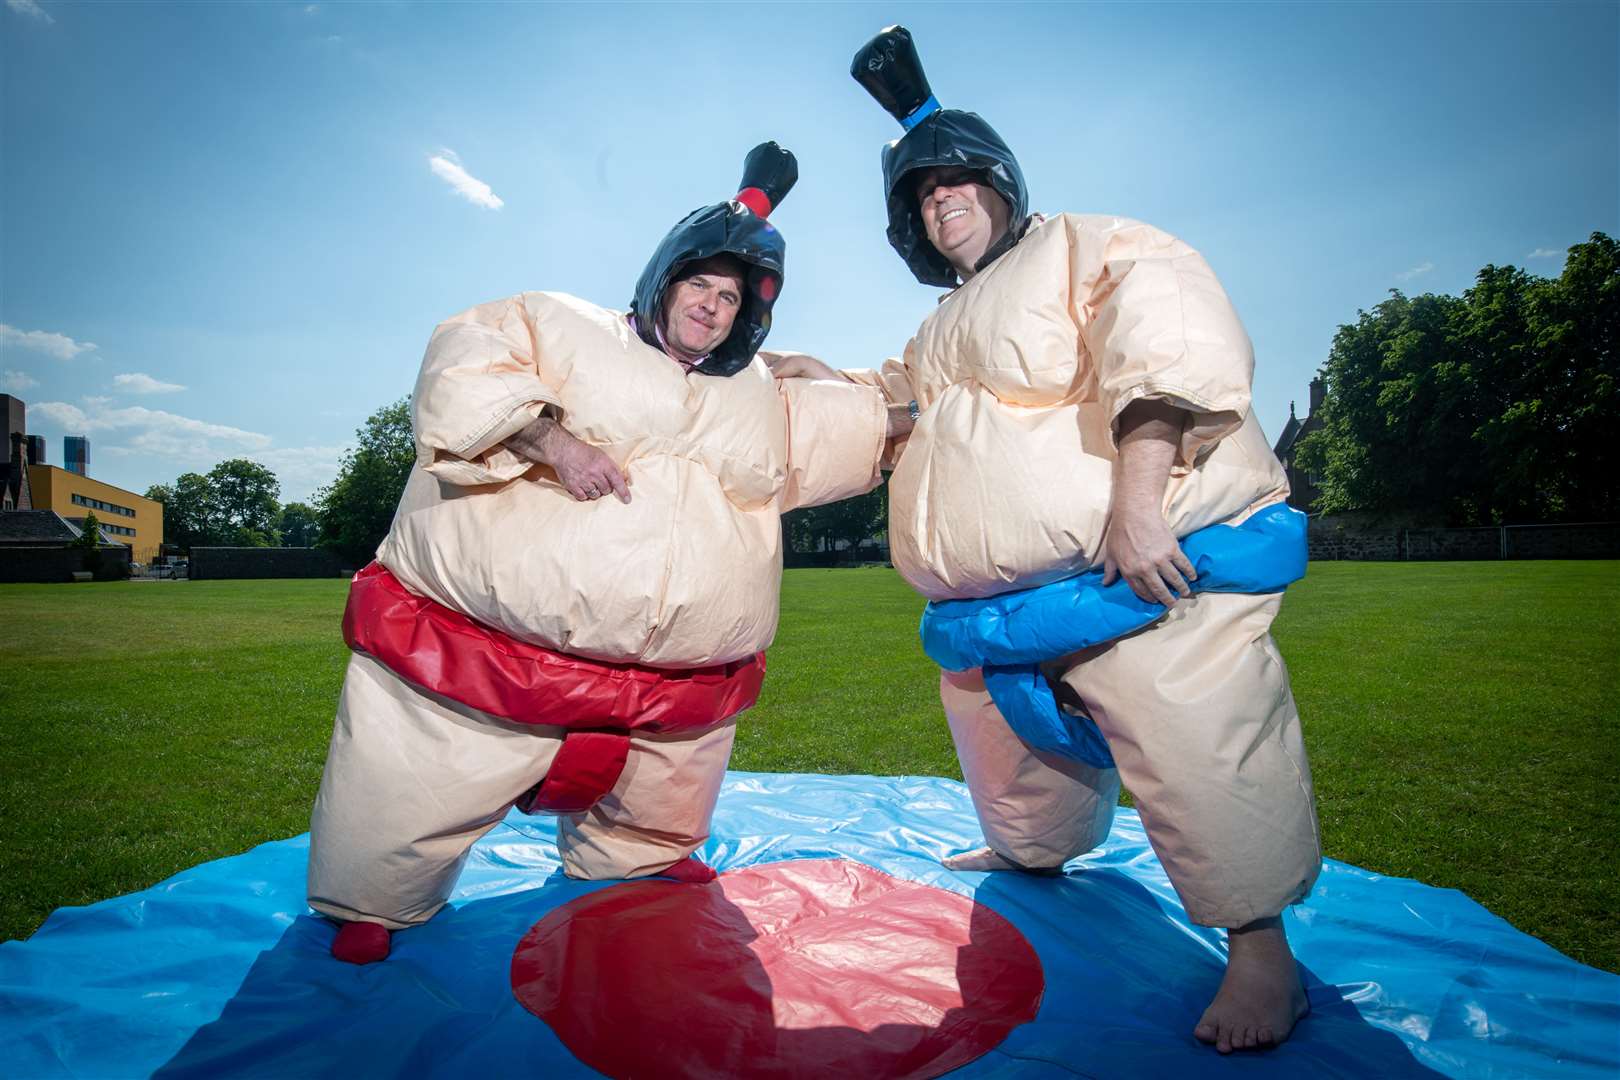 Steve Walsh and Les Kidger in Sumo suits. Picture: Callum Mackay